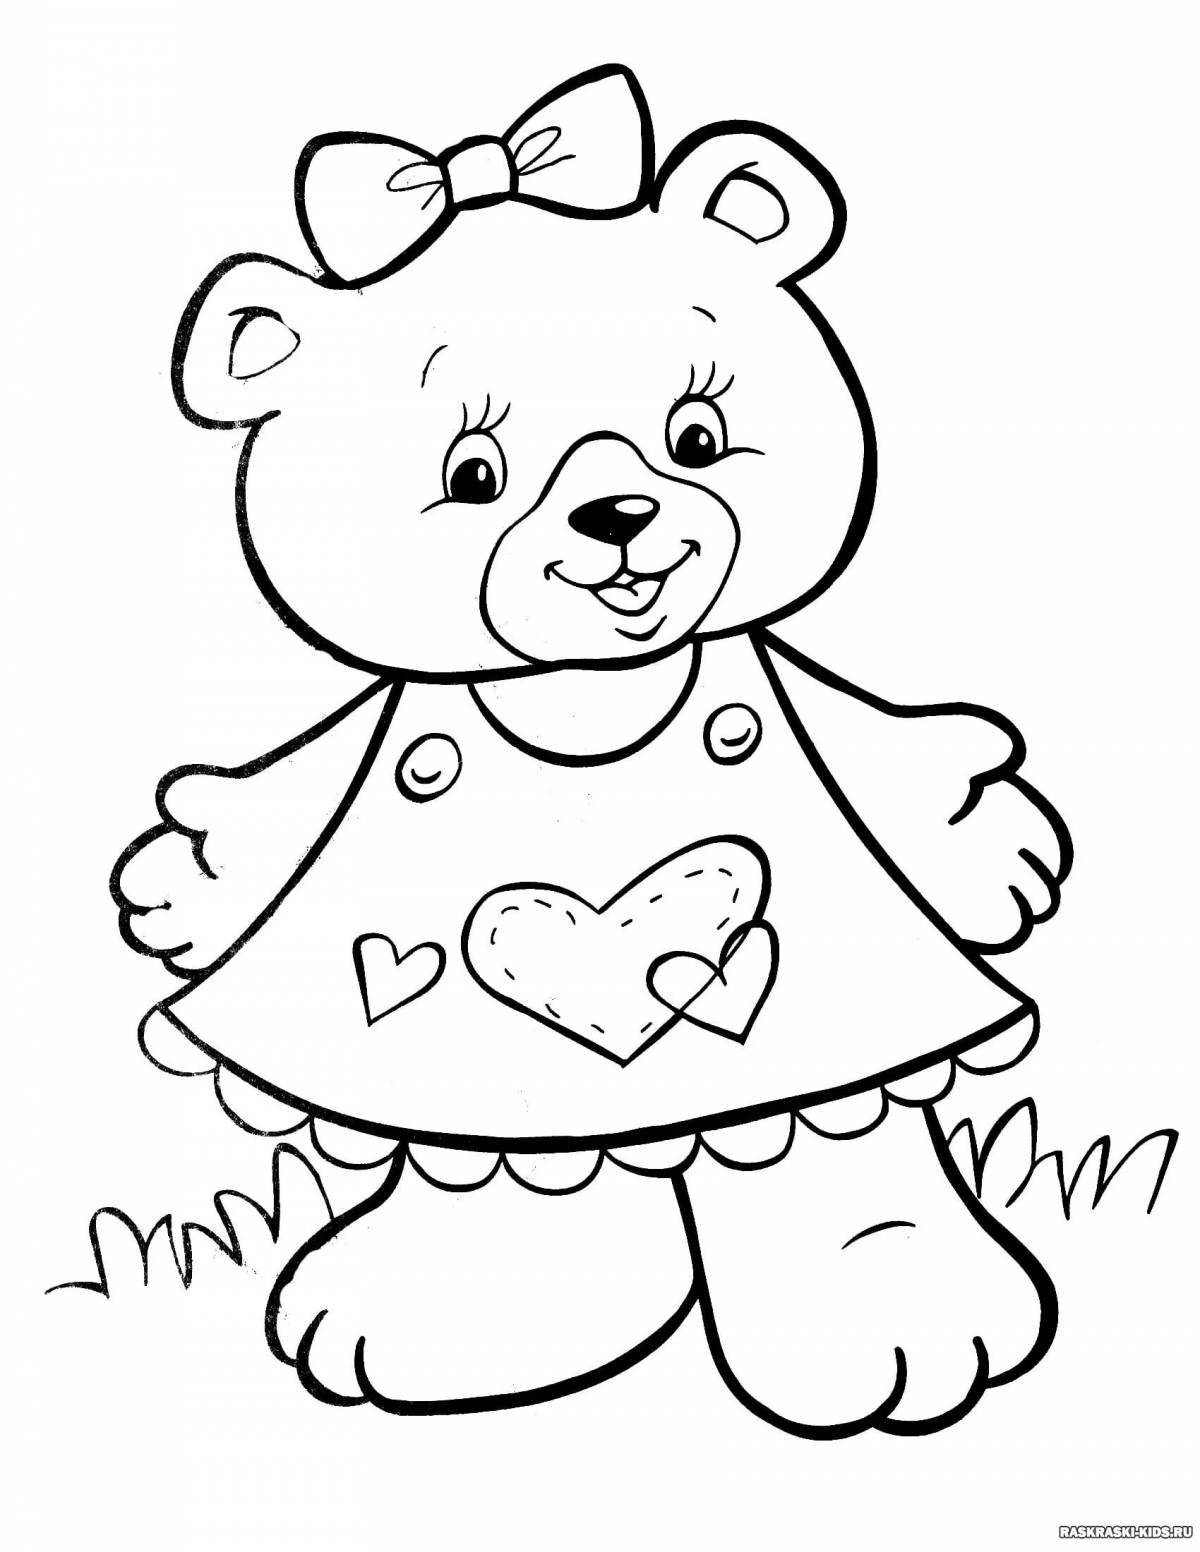 Coloring three bears for children